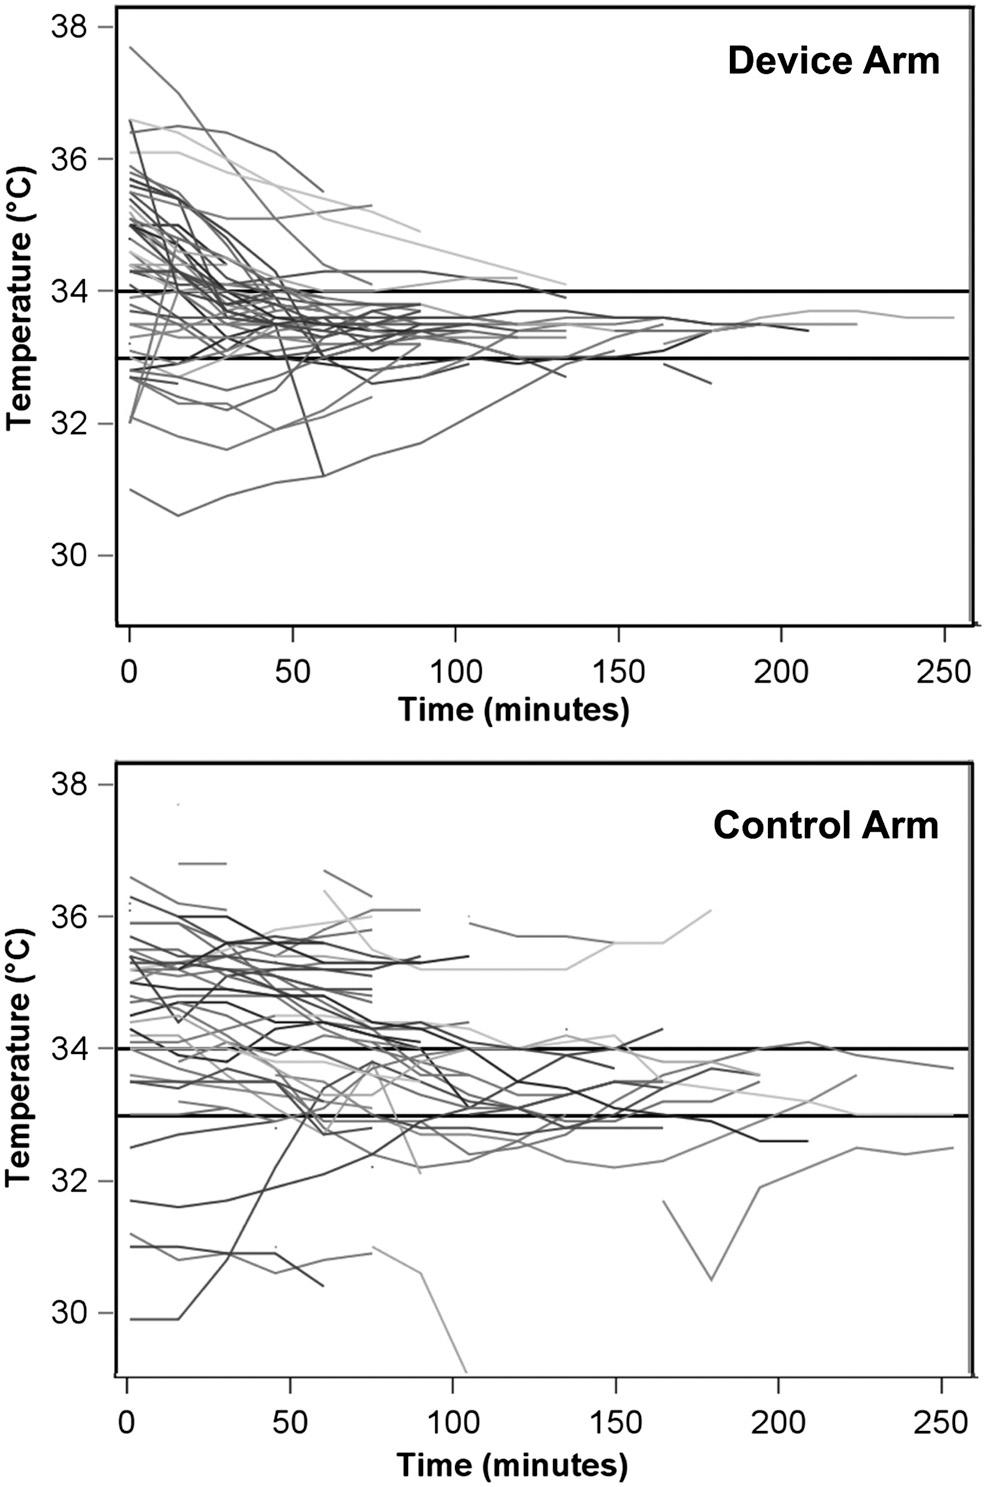 Fig. 2.2, The profile of core temperatures among infants undergoing initiation of hypothermia therapy on transport for infants actively cooled with a device (top panel) and those undergoing passive cooling (control, bottom panel). The target temperature range was 33 to 34°C (horizontal lines) and each patient is represented by a separate line from the initiation of the transport (time 0) to arrival at the center providing hypothermia.